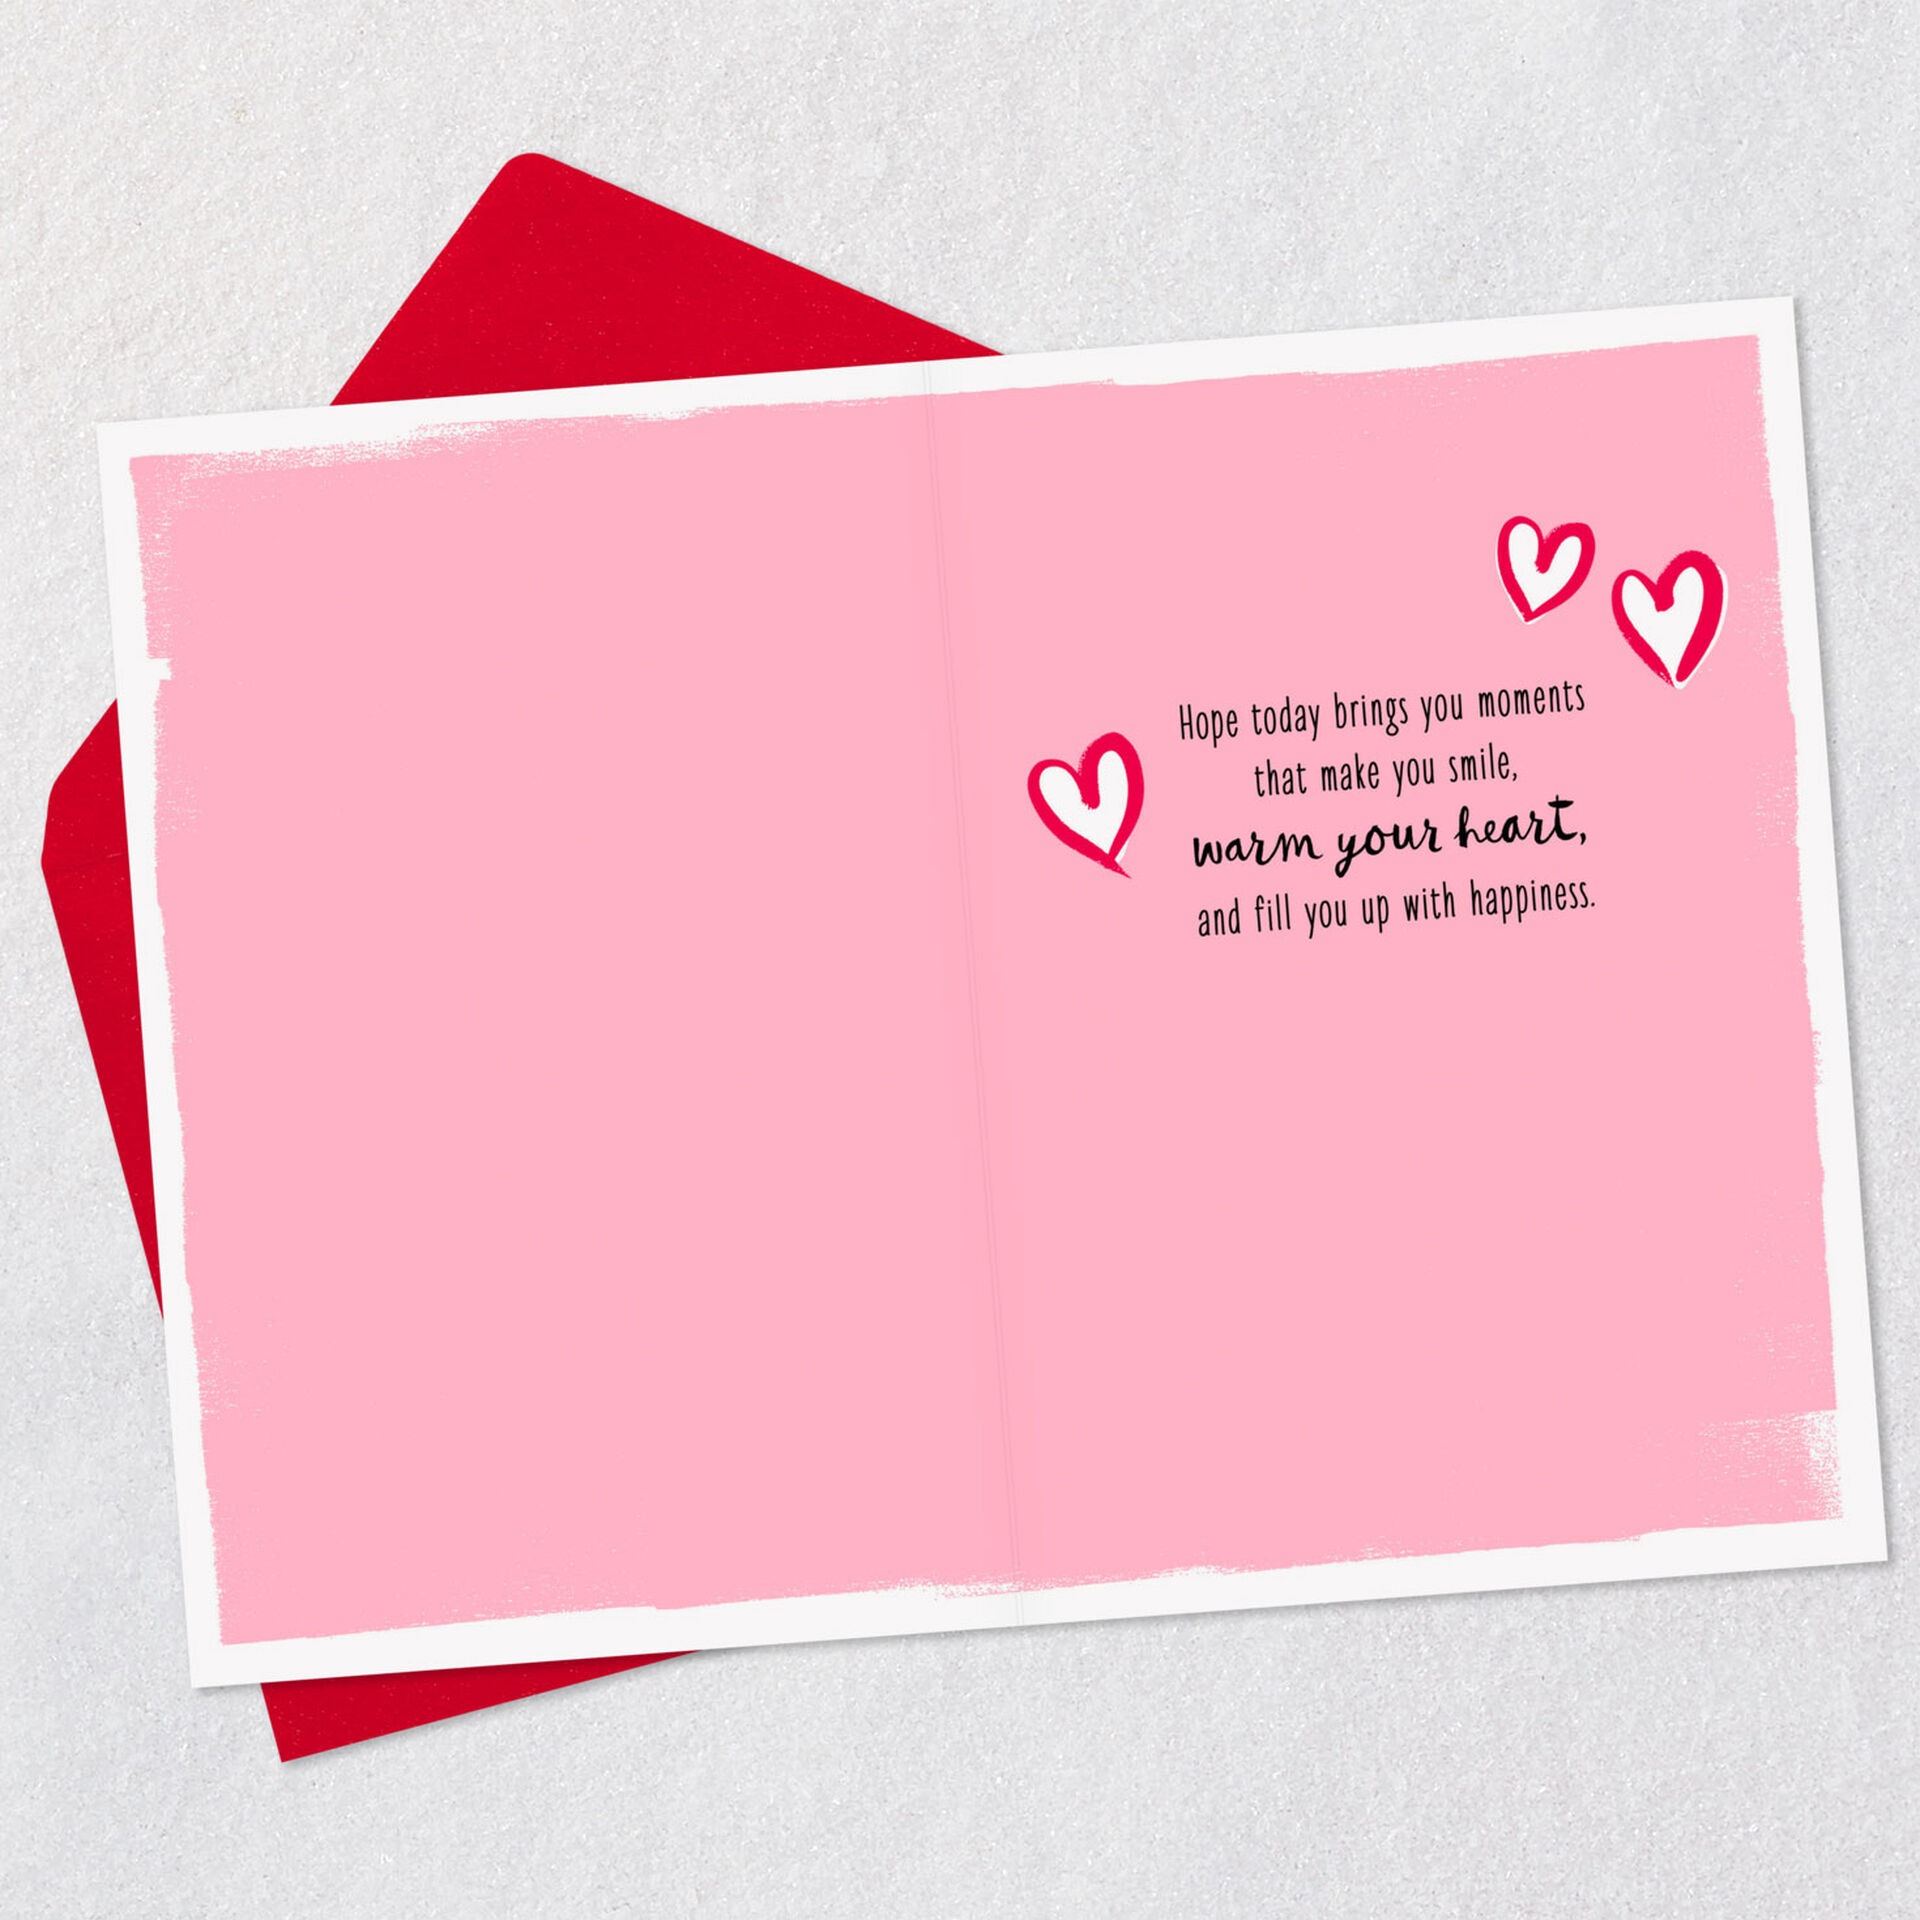 Red-Heart-on-Pink-Valentines-Day-Card_200VV4037_03